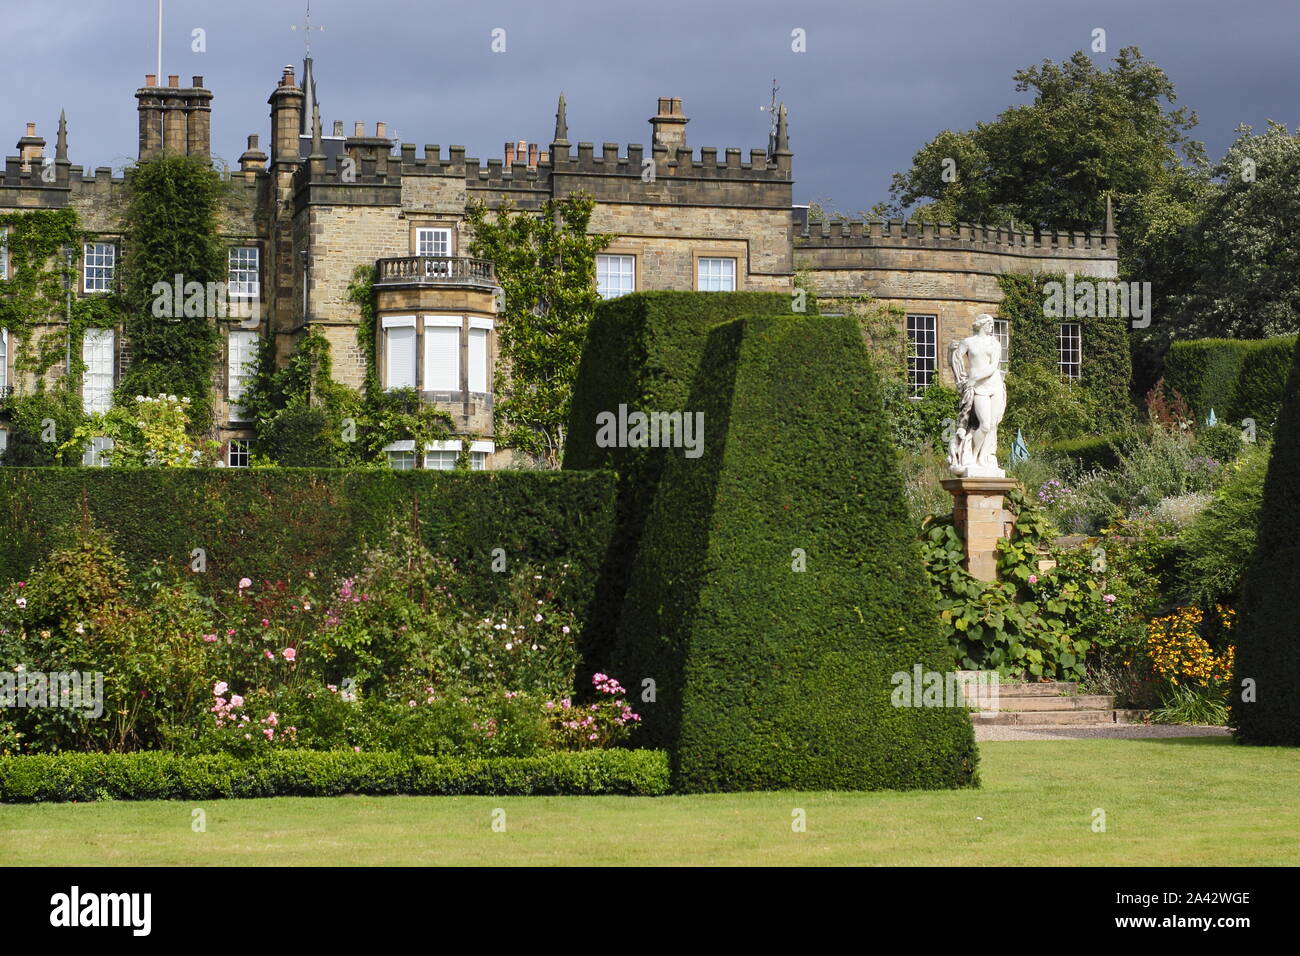 Yew topiary hedges (Taxus baccata) framing lawns and borders at Renishaw Hall and Gardens, Eckington, Derbyshire, UK. September Stock Photo